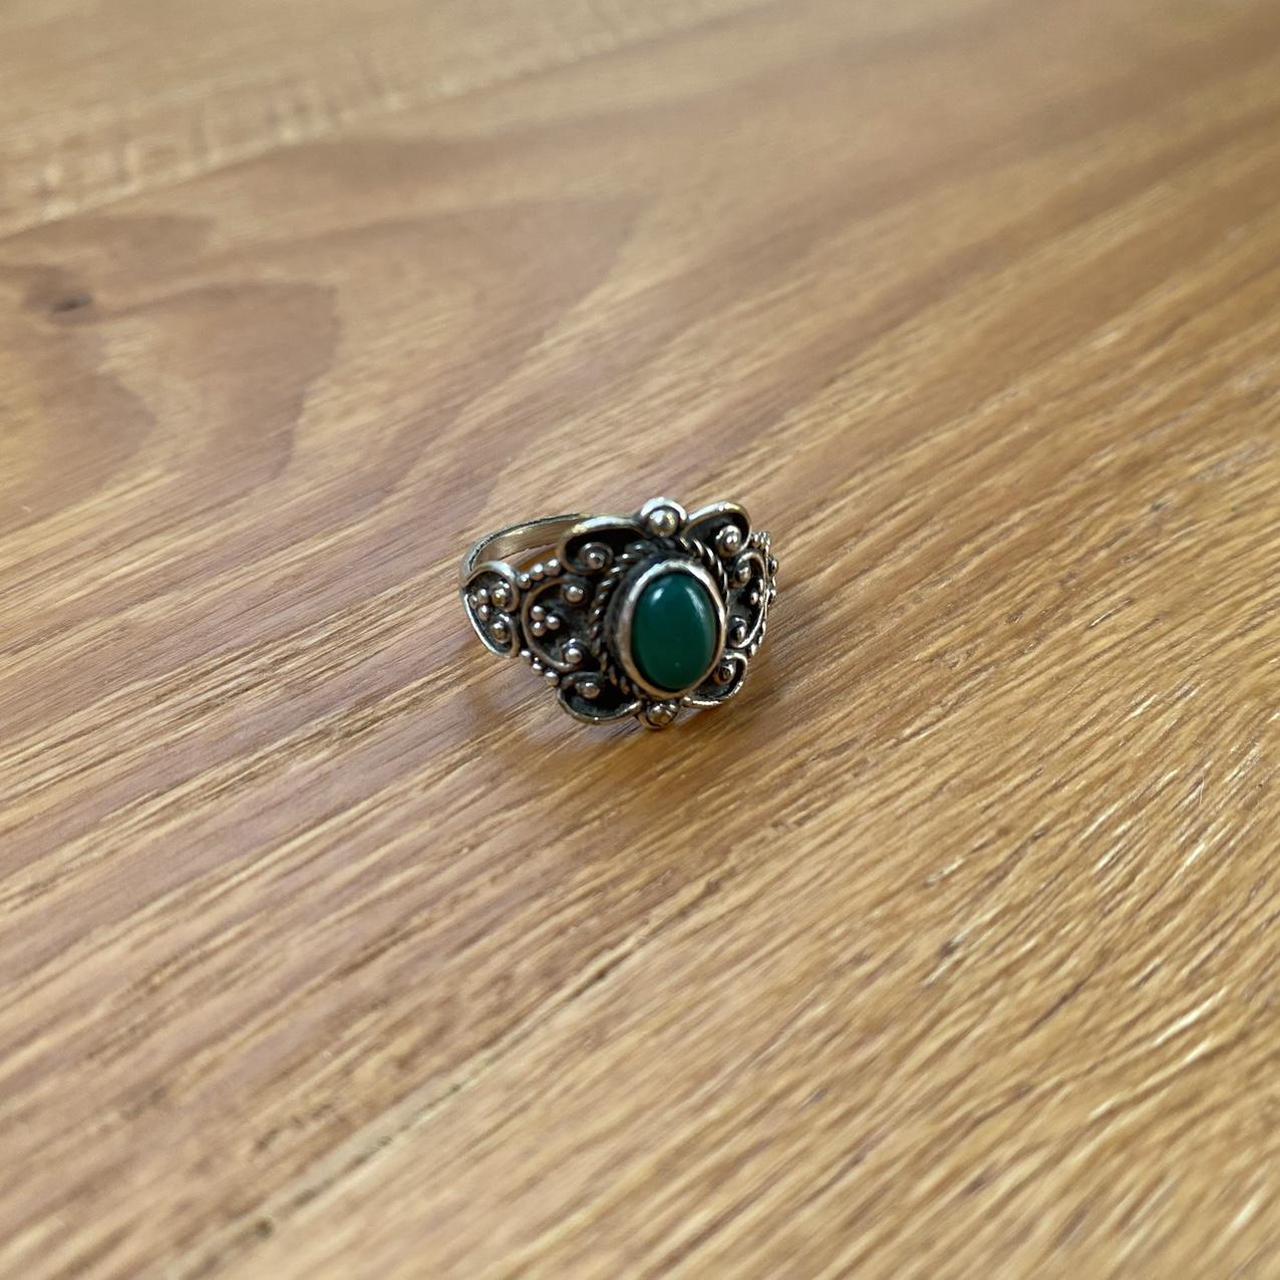 Product Image 2 - Ornamented silver ring with emerald